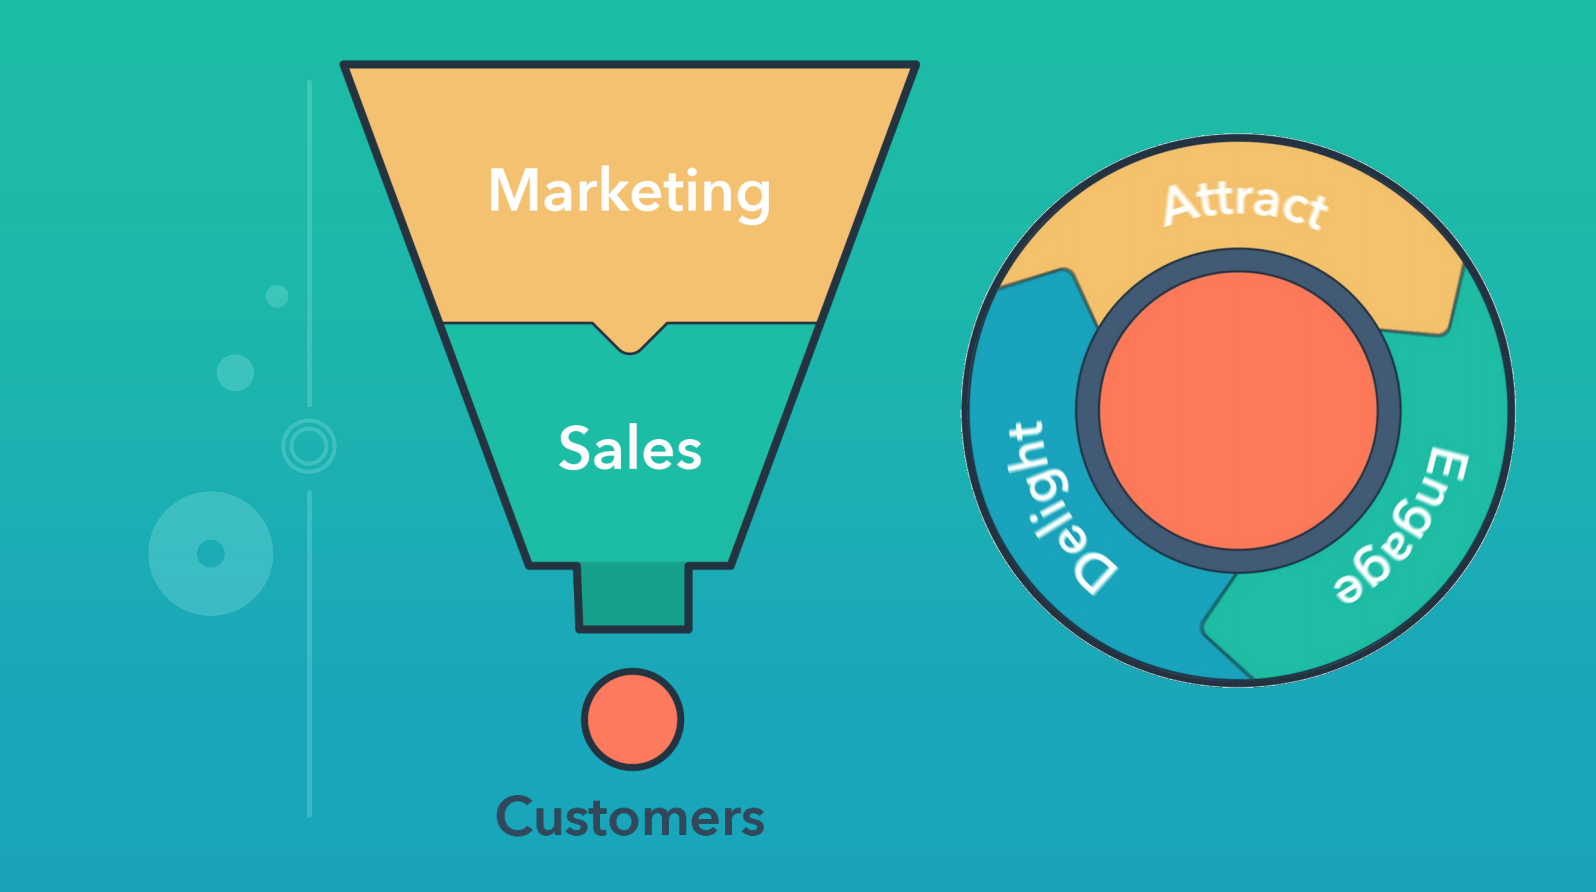 How effective is the flywheel in comparison to the sales funnel